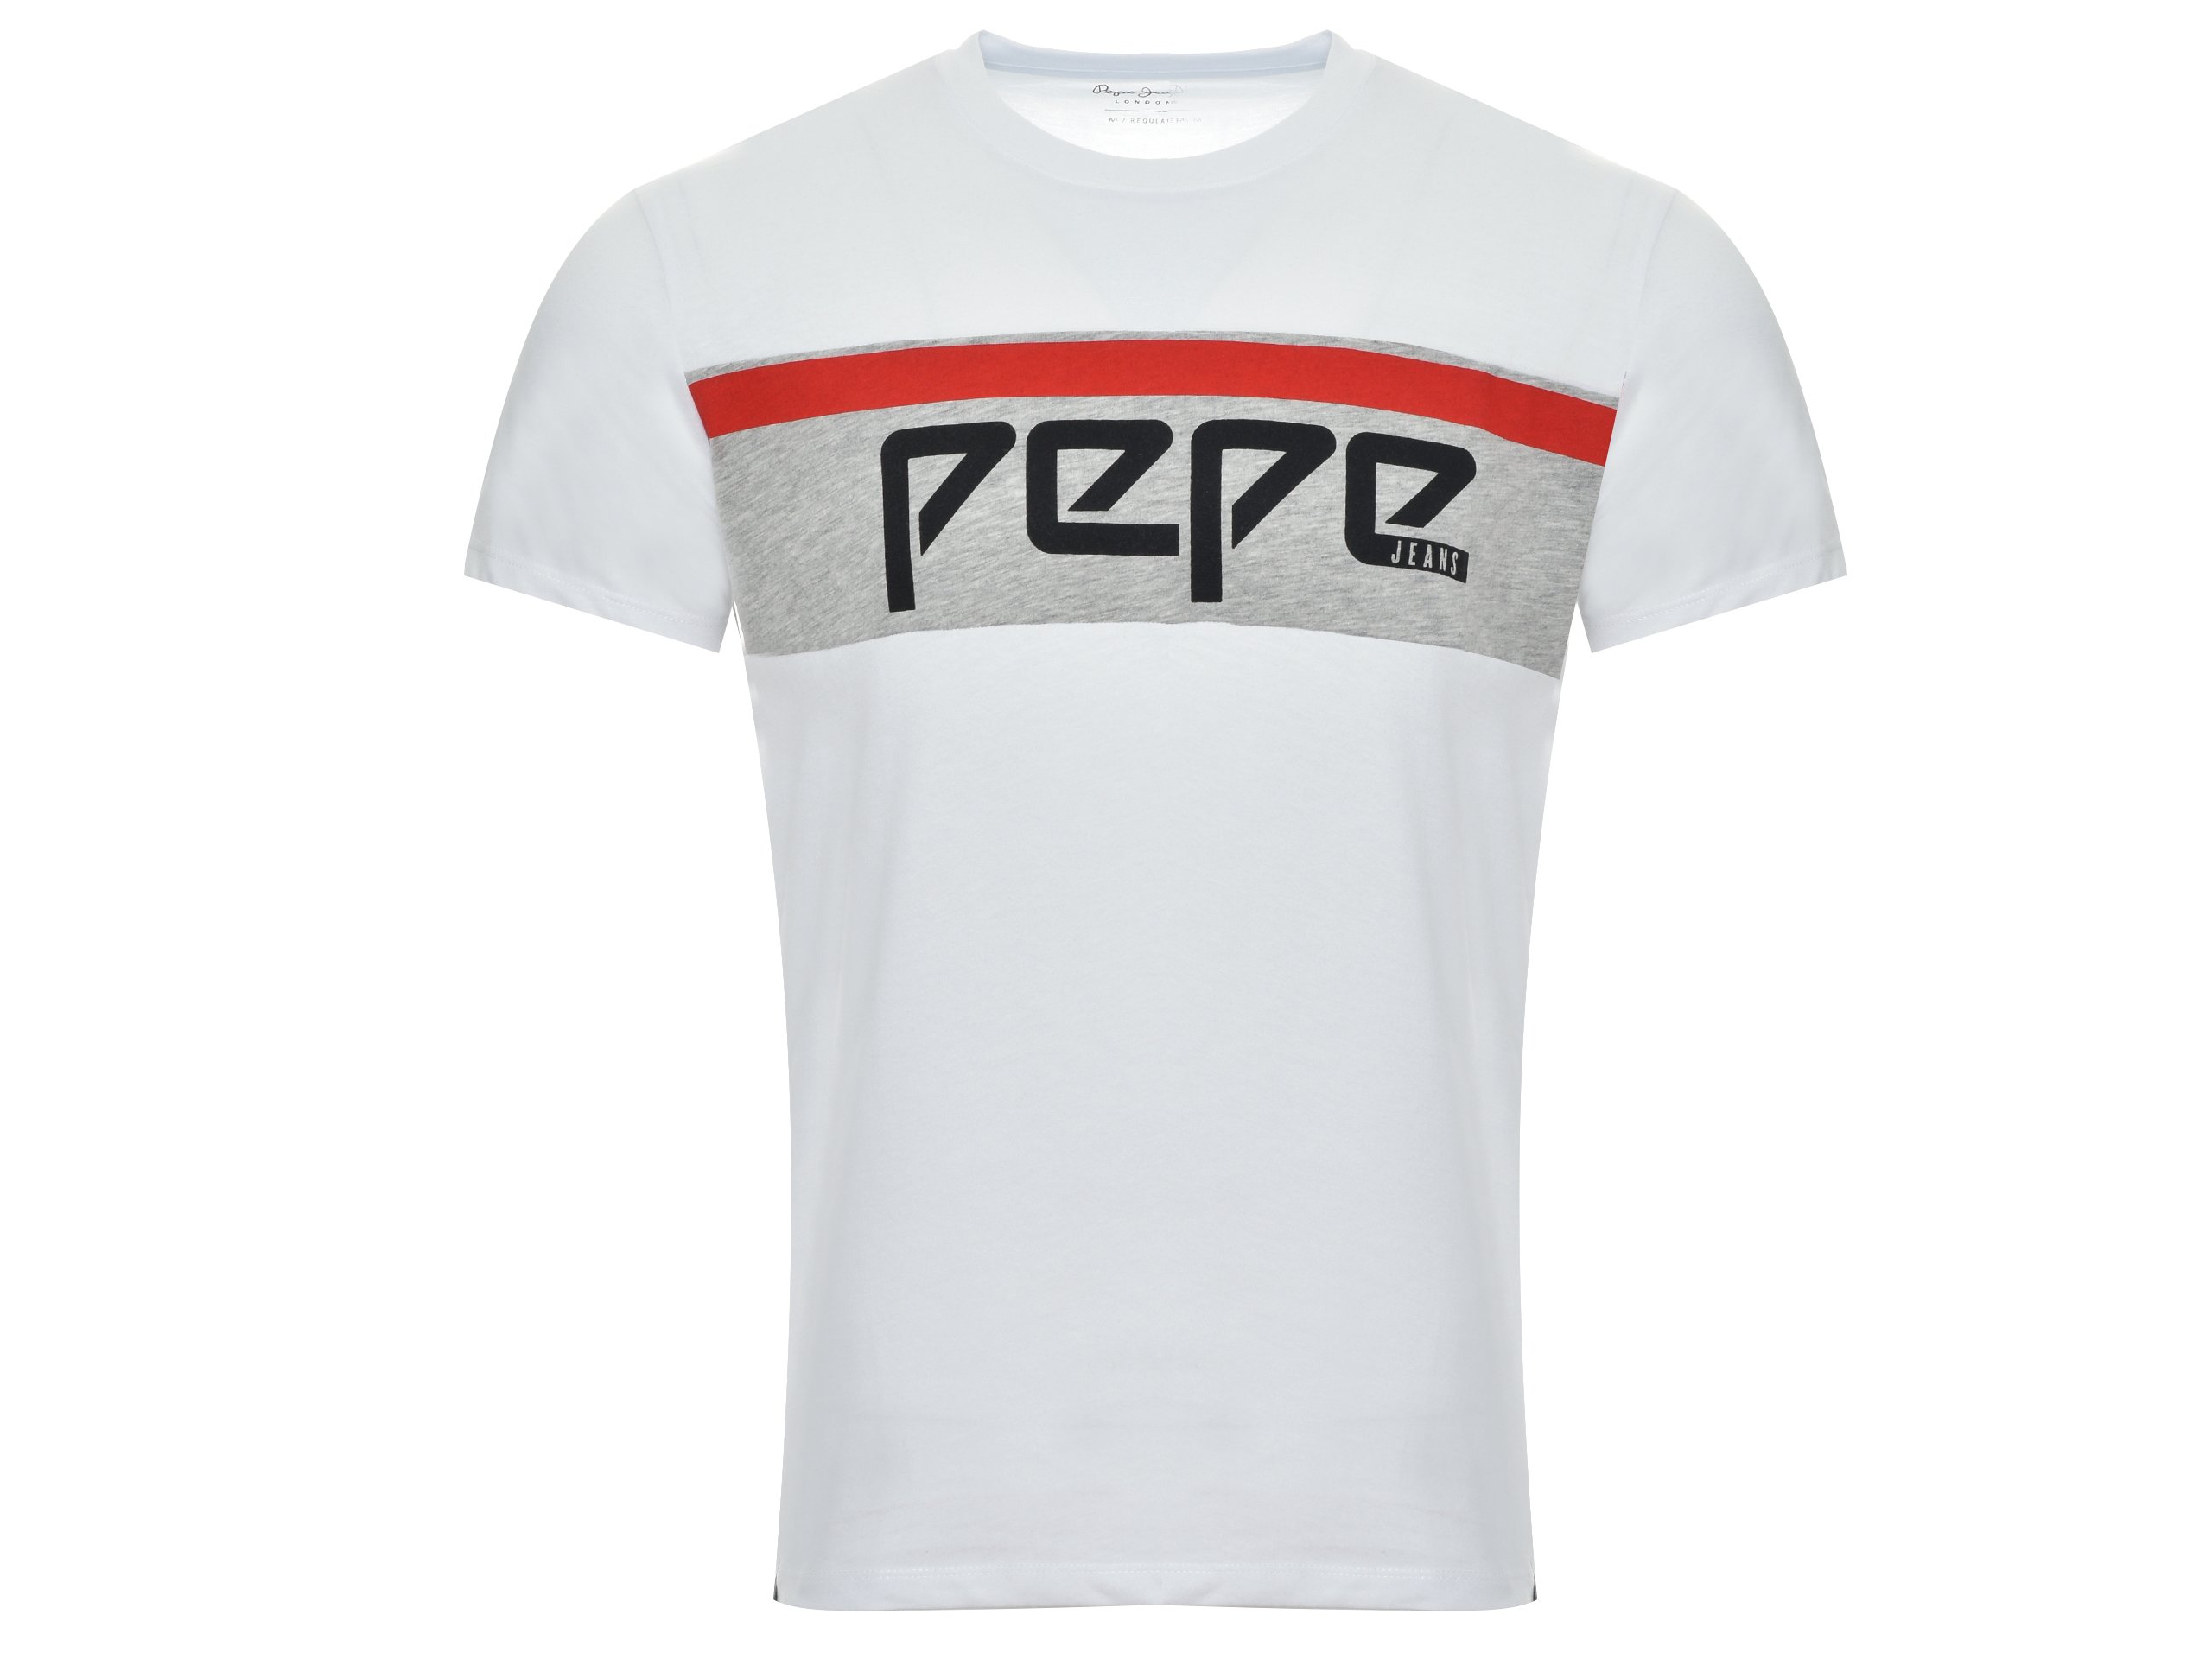 Pepe Jeans - London branded sports a White - footwear supplier Jeans Biały Nathan trusted Mens \\ PM506306 | Kicks T-shirt 800 - - of | Sport Pepe